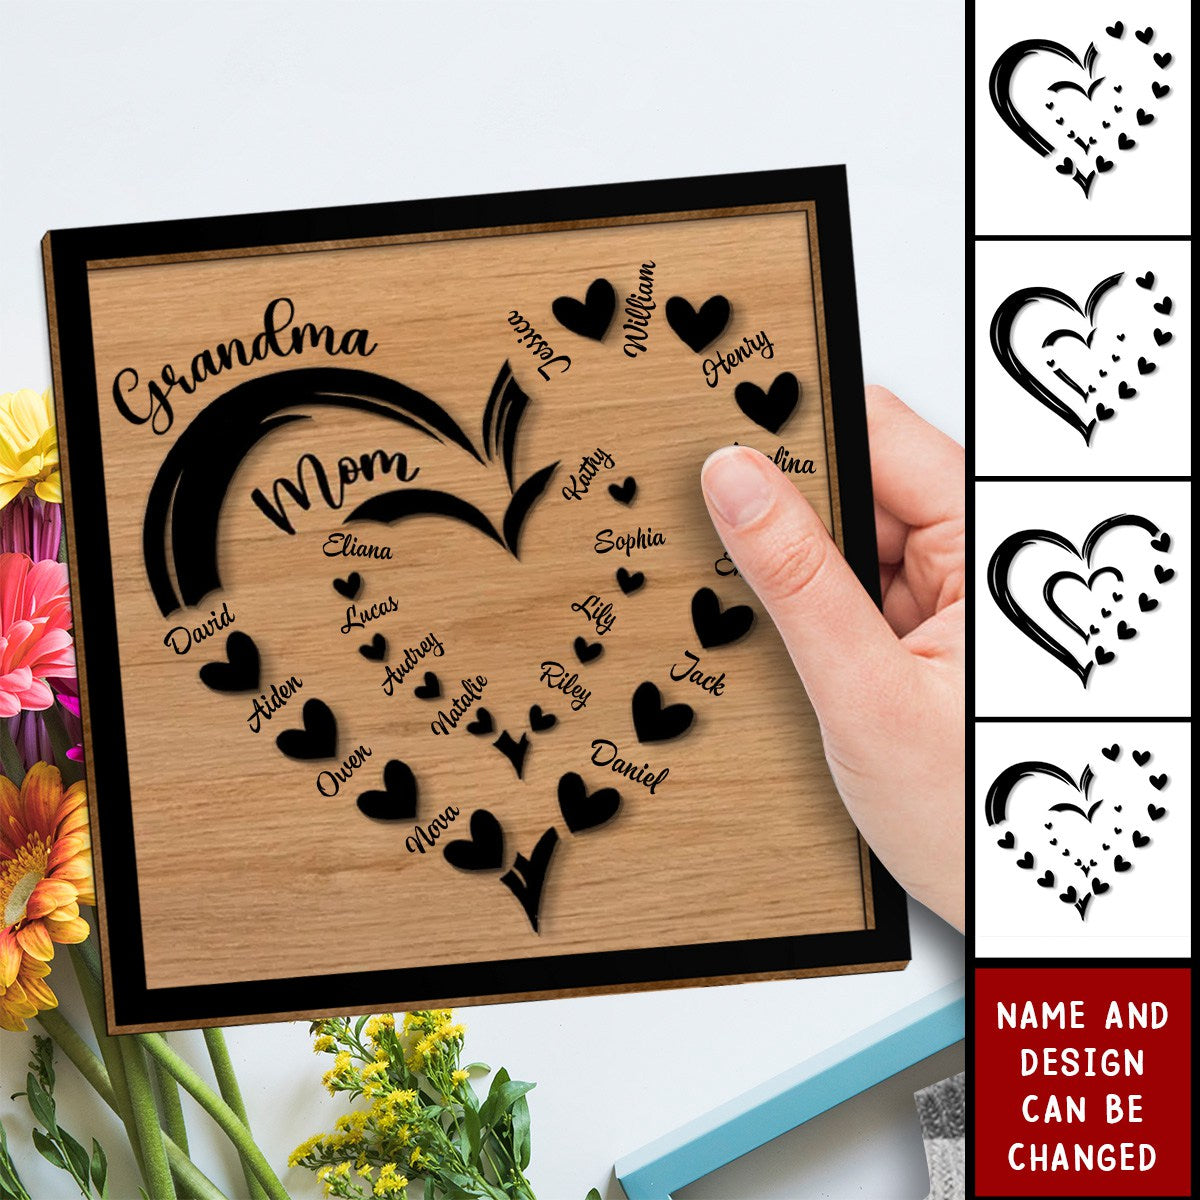 Grandma Mom Heart In Heart Personalized Wooden Plaque, Mother's Day Gift For Mom